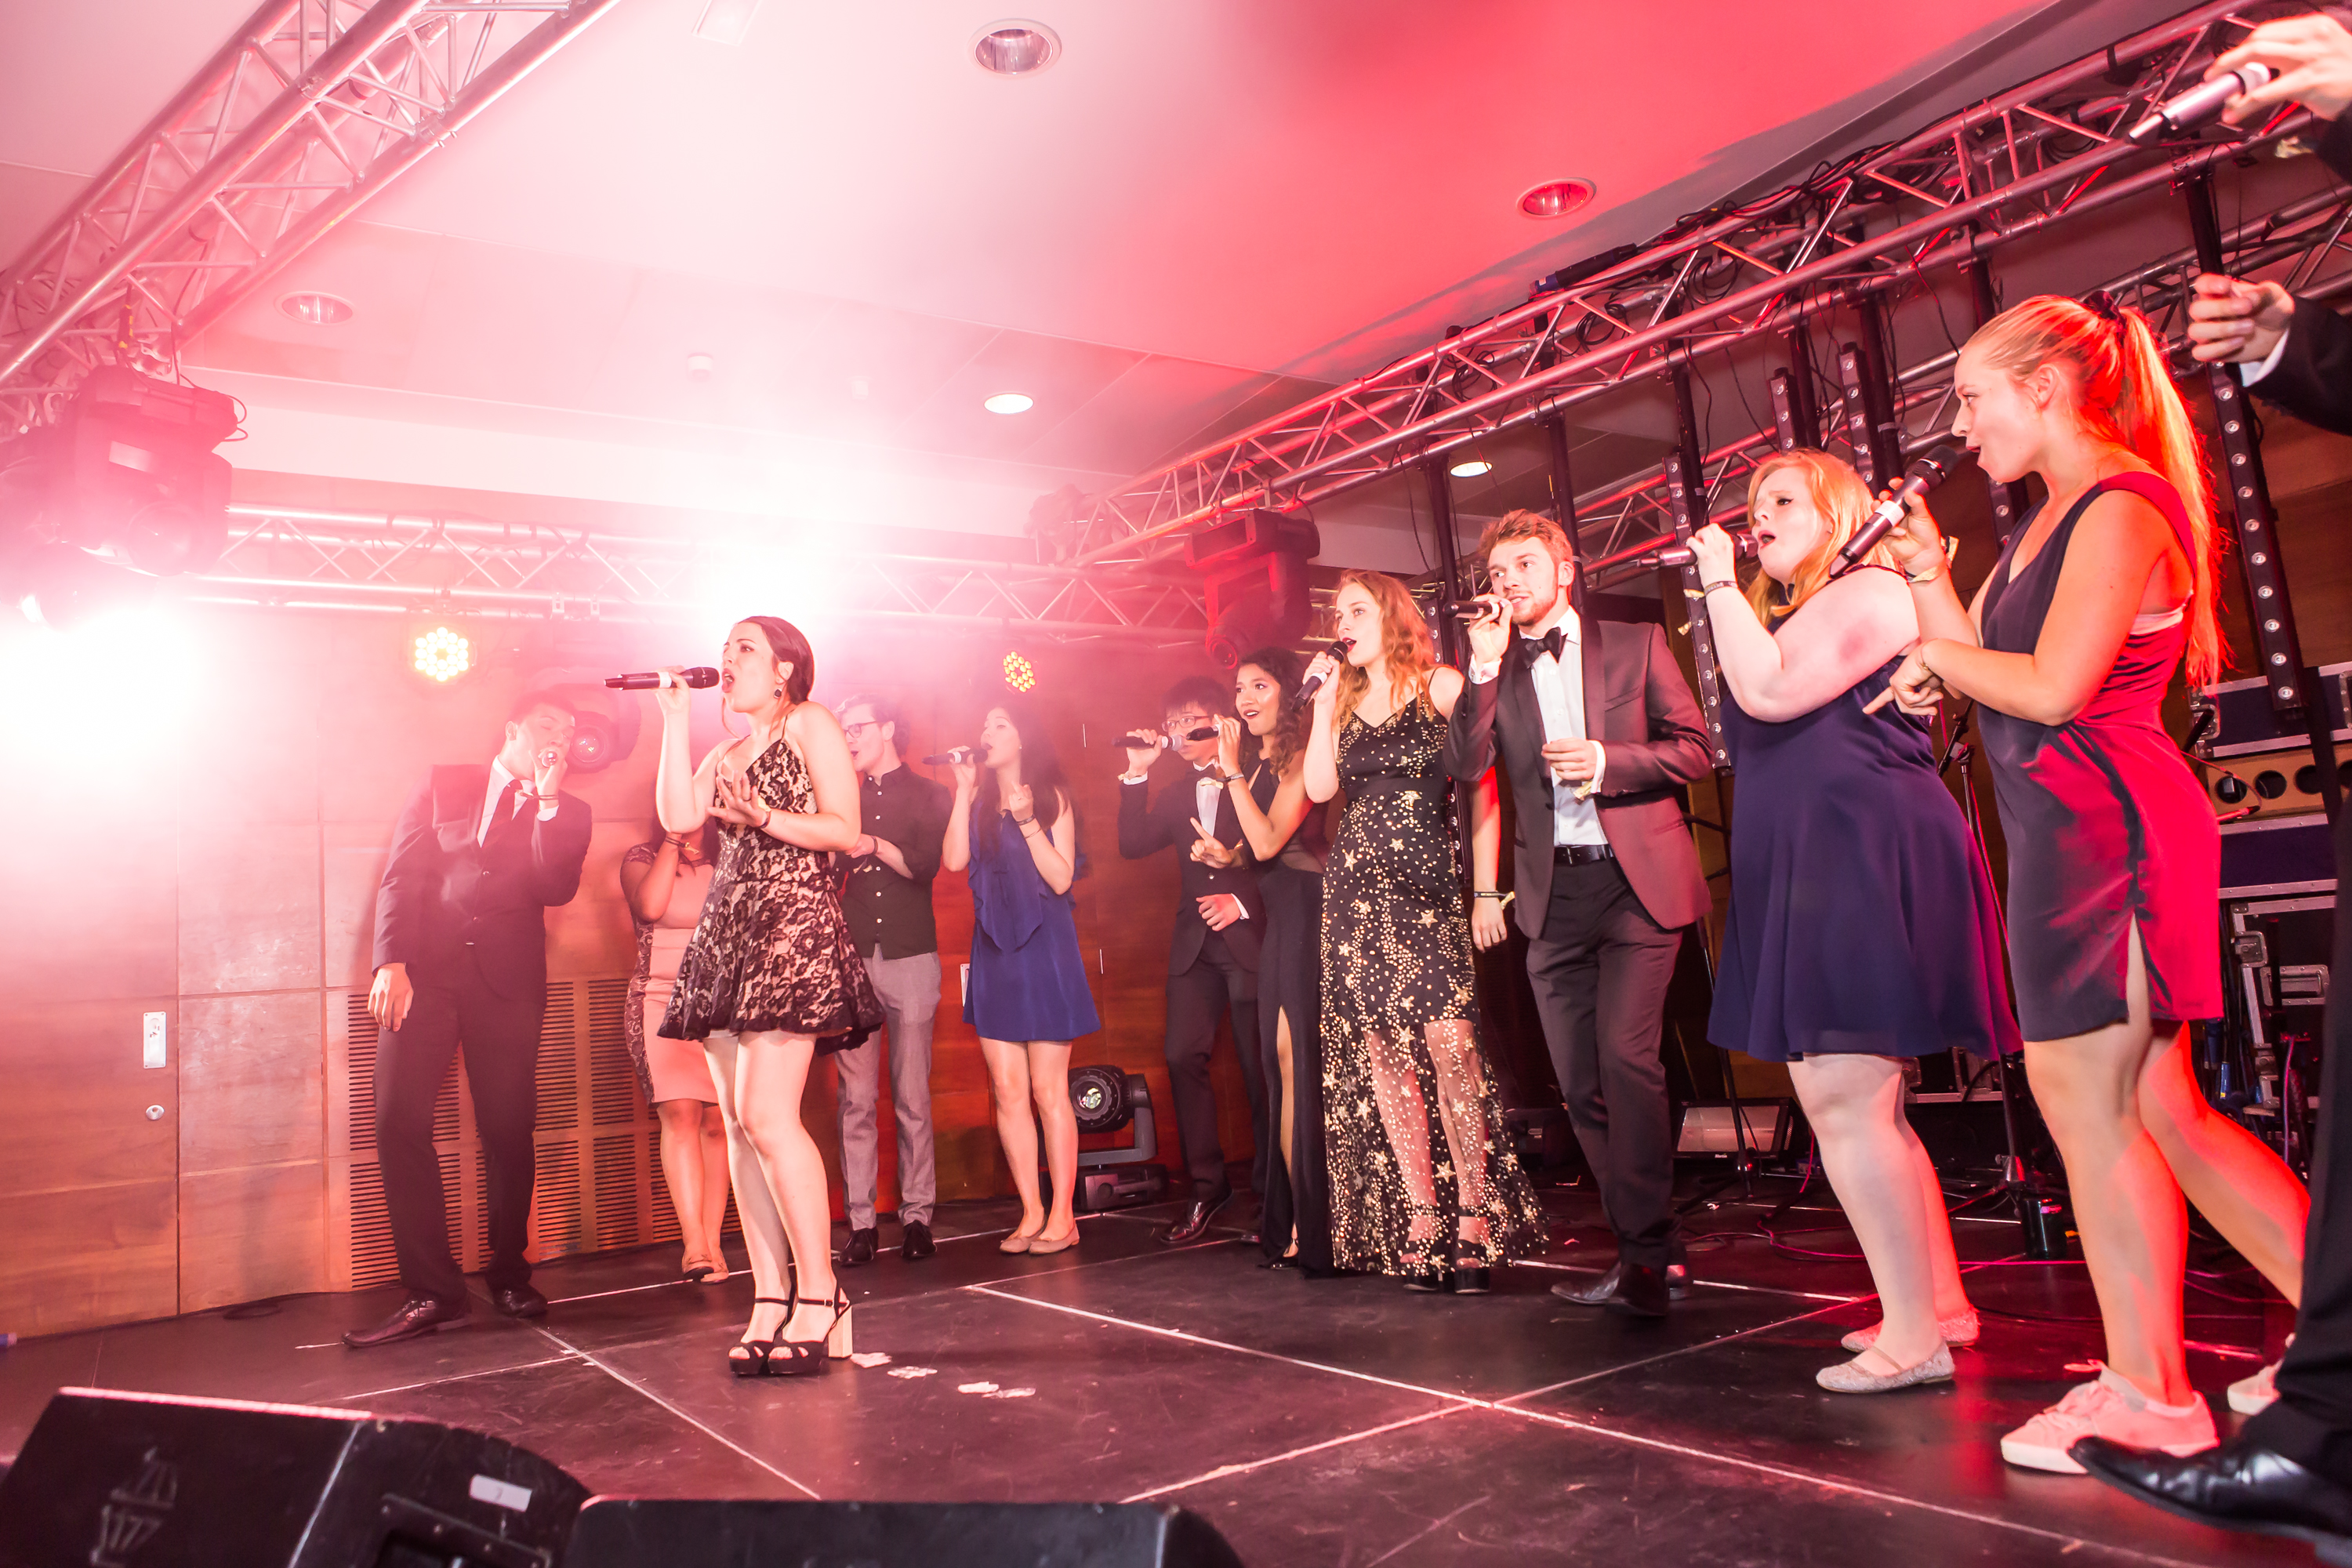 A cappella group performing on stage.